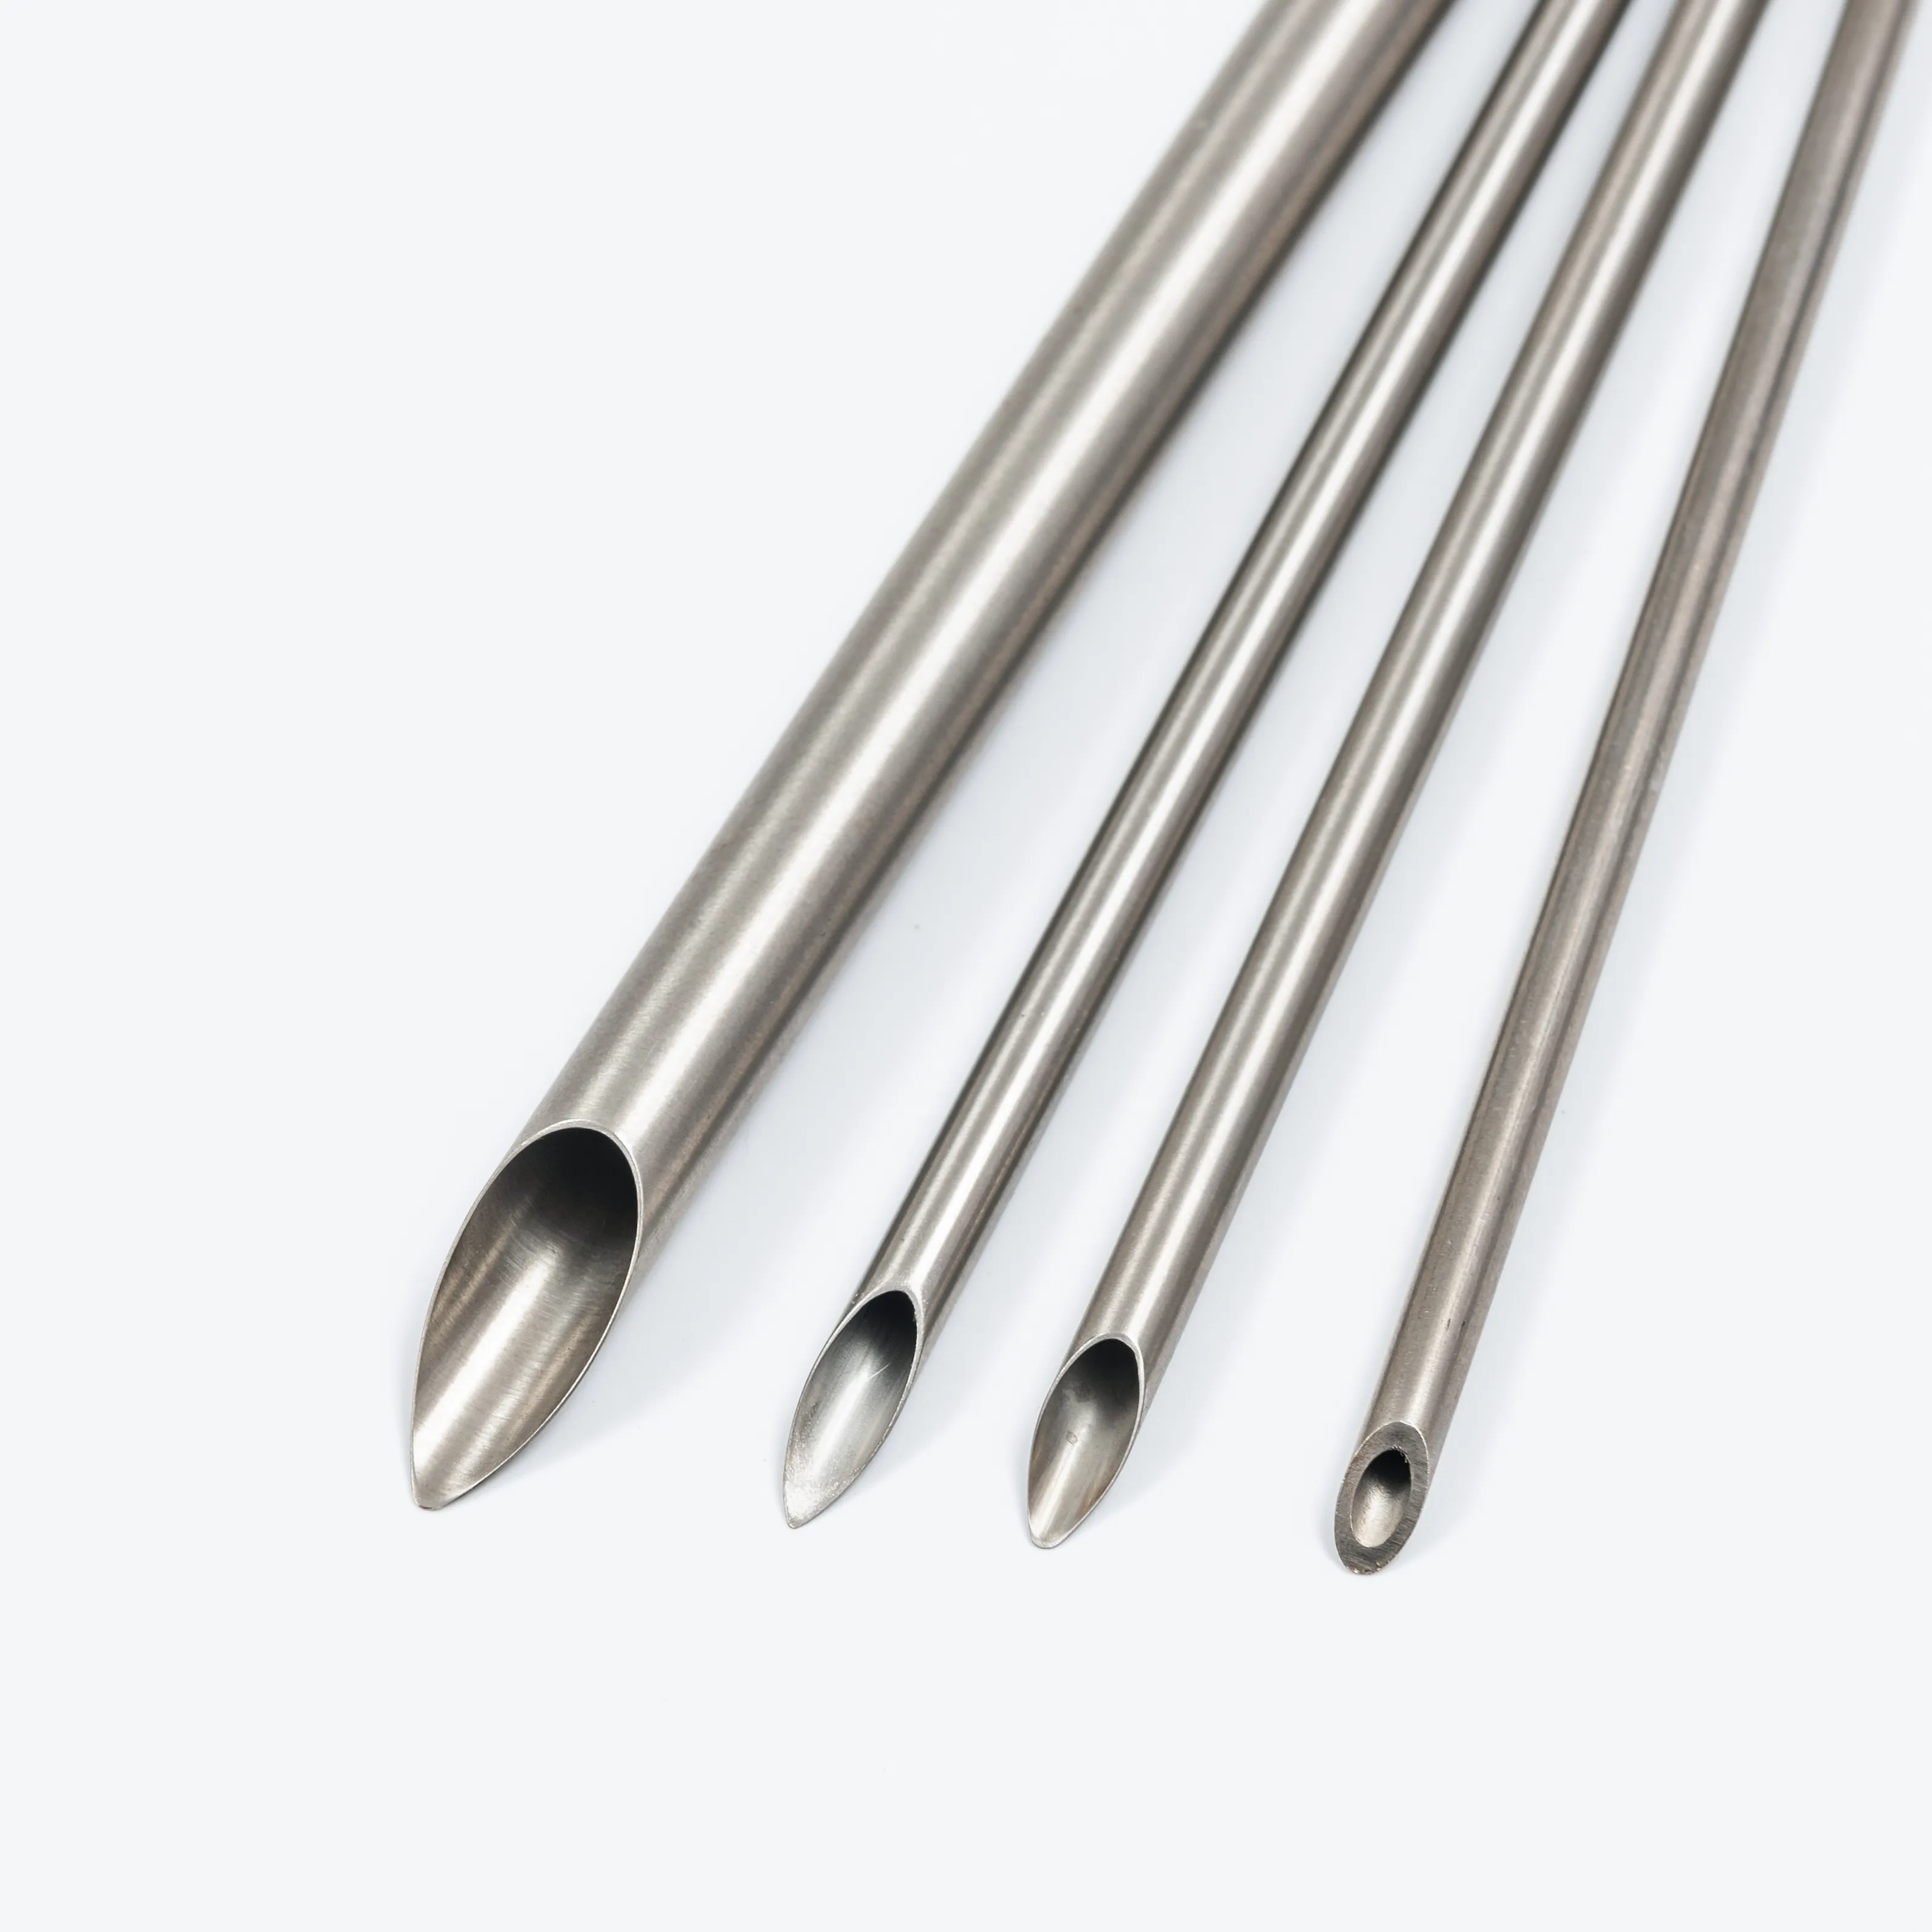 Polishing Pointed Stainless Steel Needle Stainless Steel Tube 316 Price Per Kg